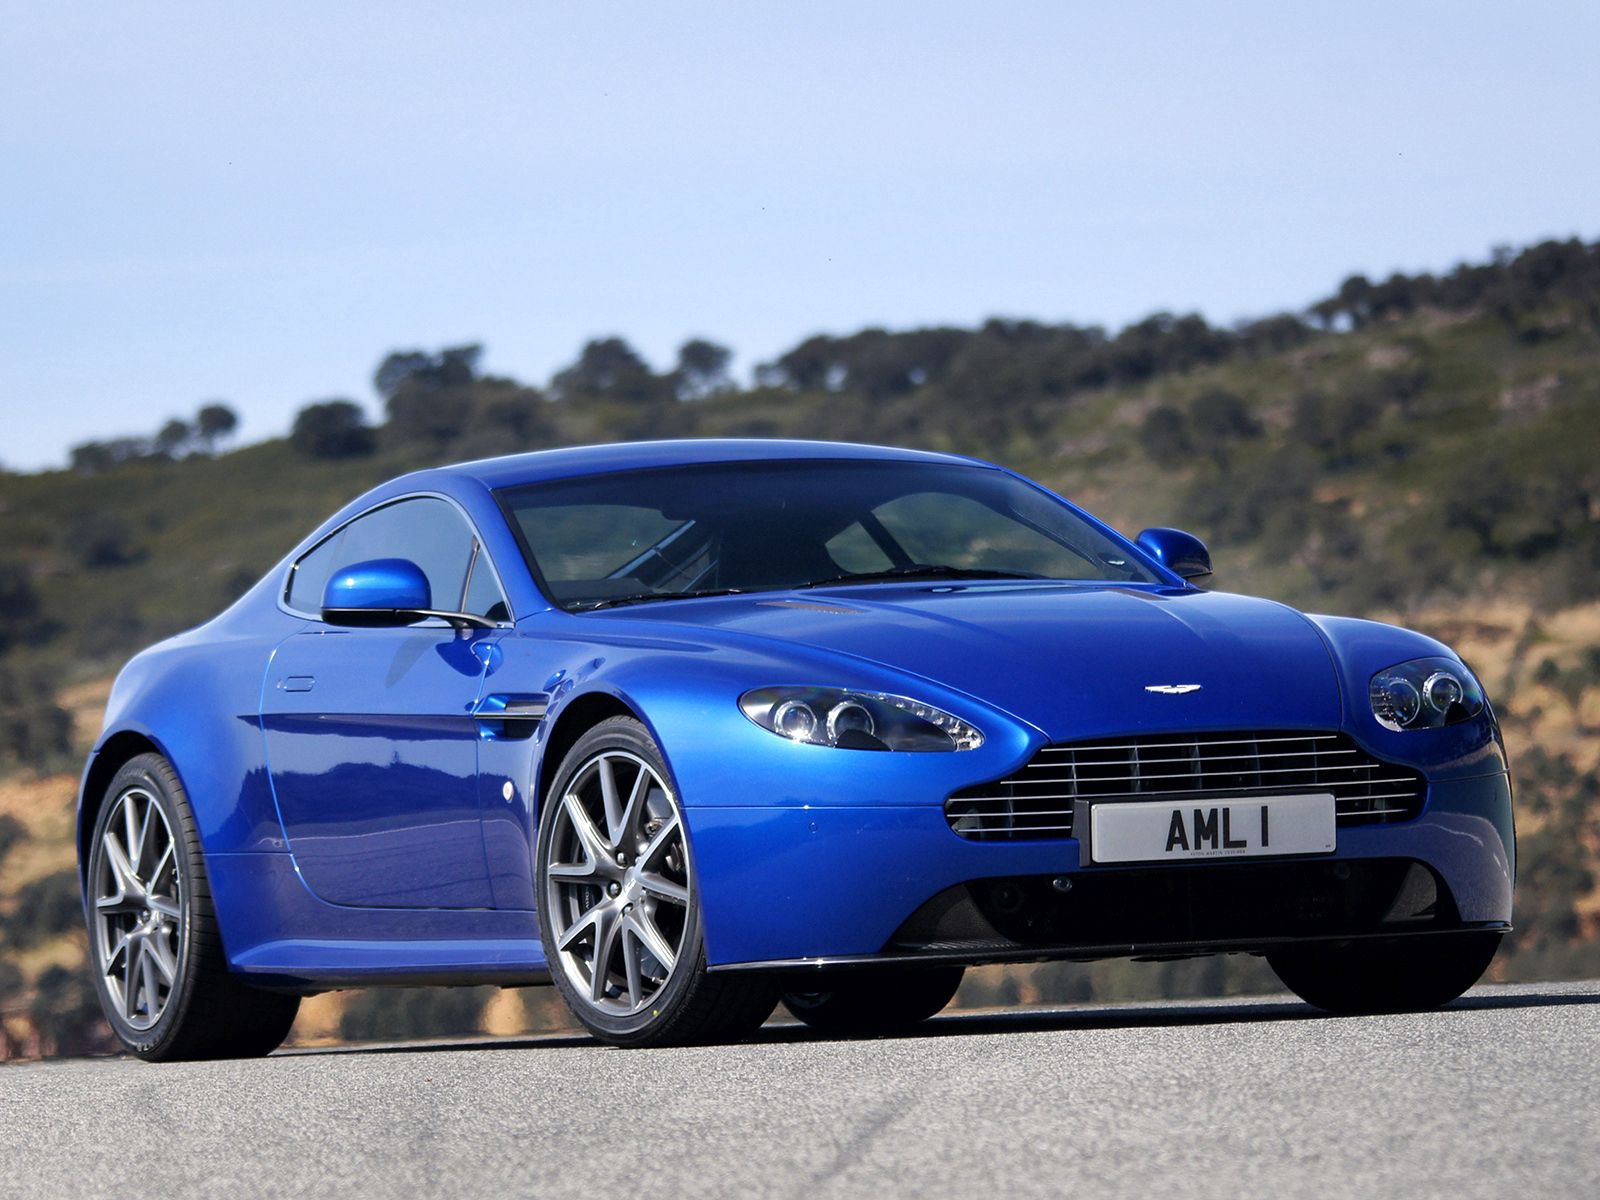 v8, front view, cars, nature, aston martin, blue, style, 2011, vantage Full HD